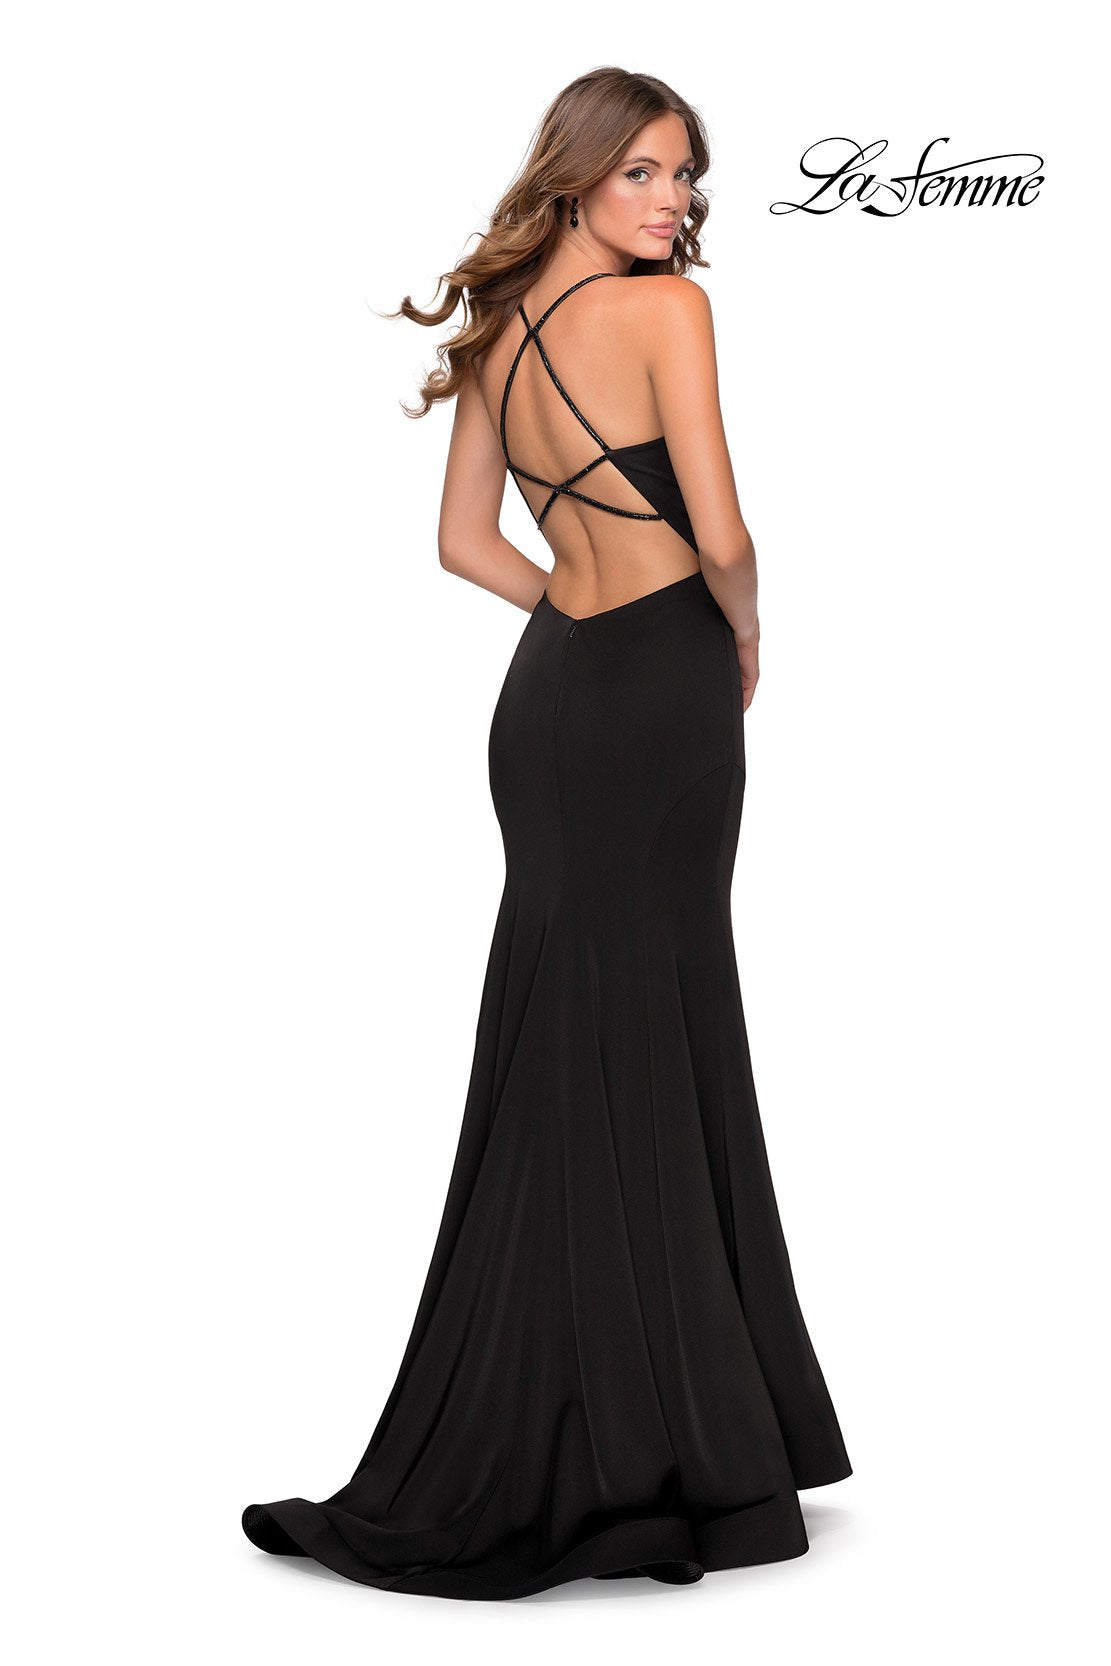 La Femme 28526 dress images in these colors: Black, Deep Red, Electric Blue, Peach.